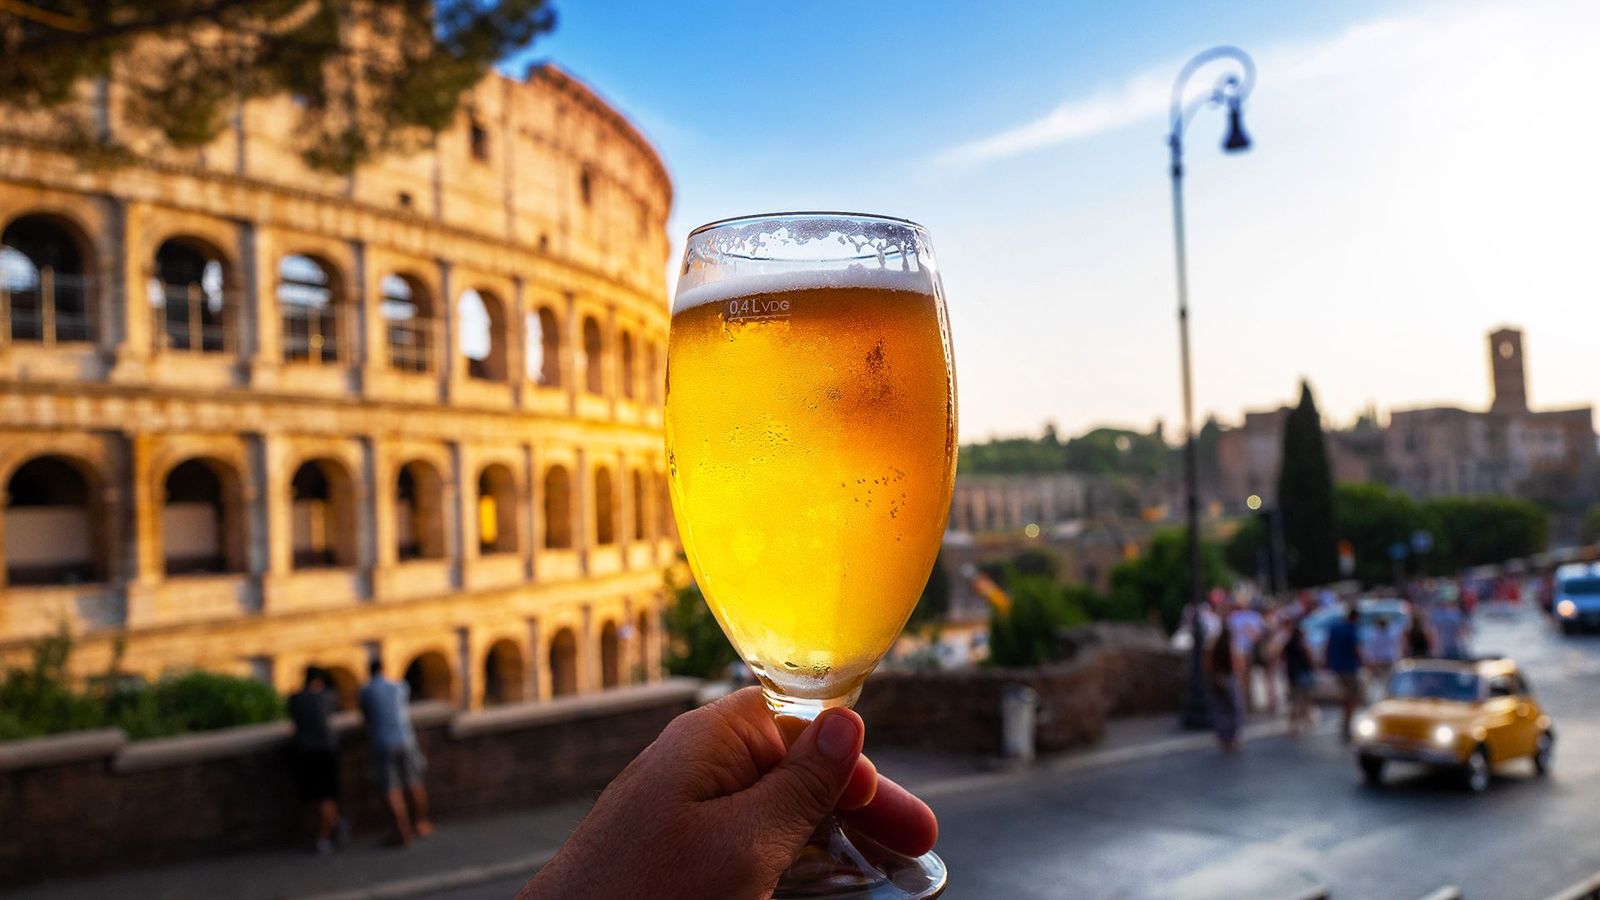 The revival of ancient brews is a drinkable window into history (Credit: nycshooter/Getty Images)